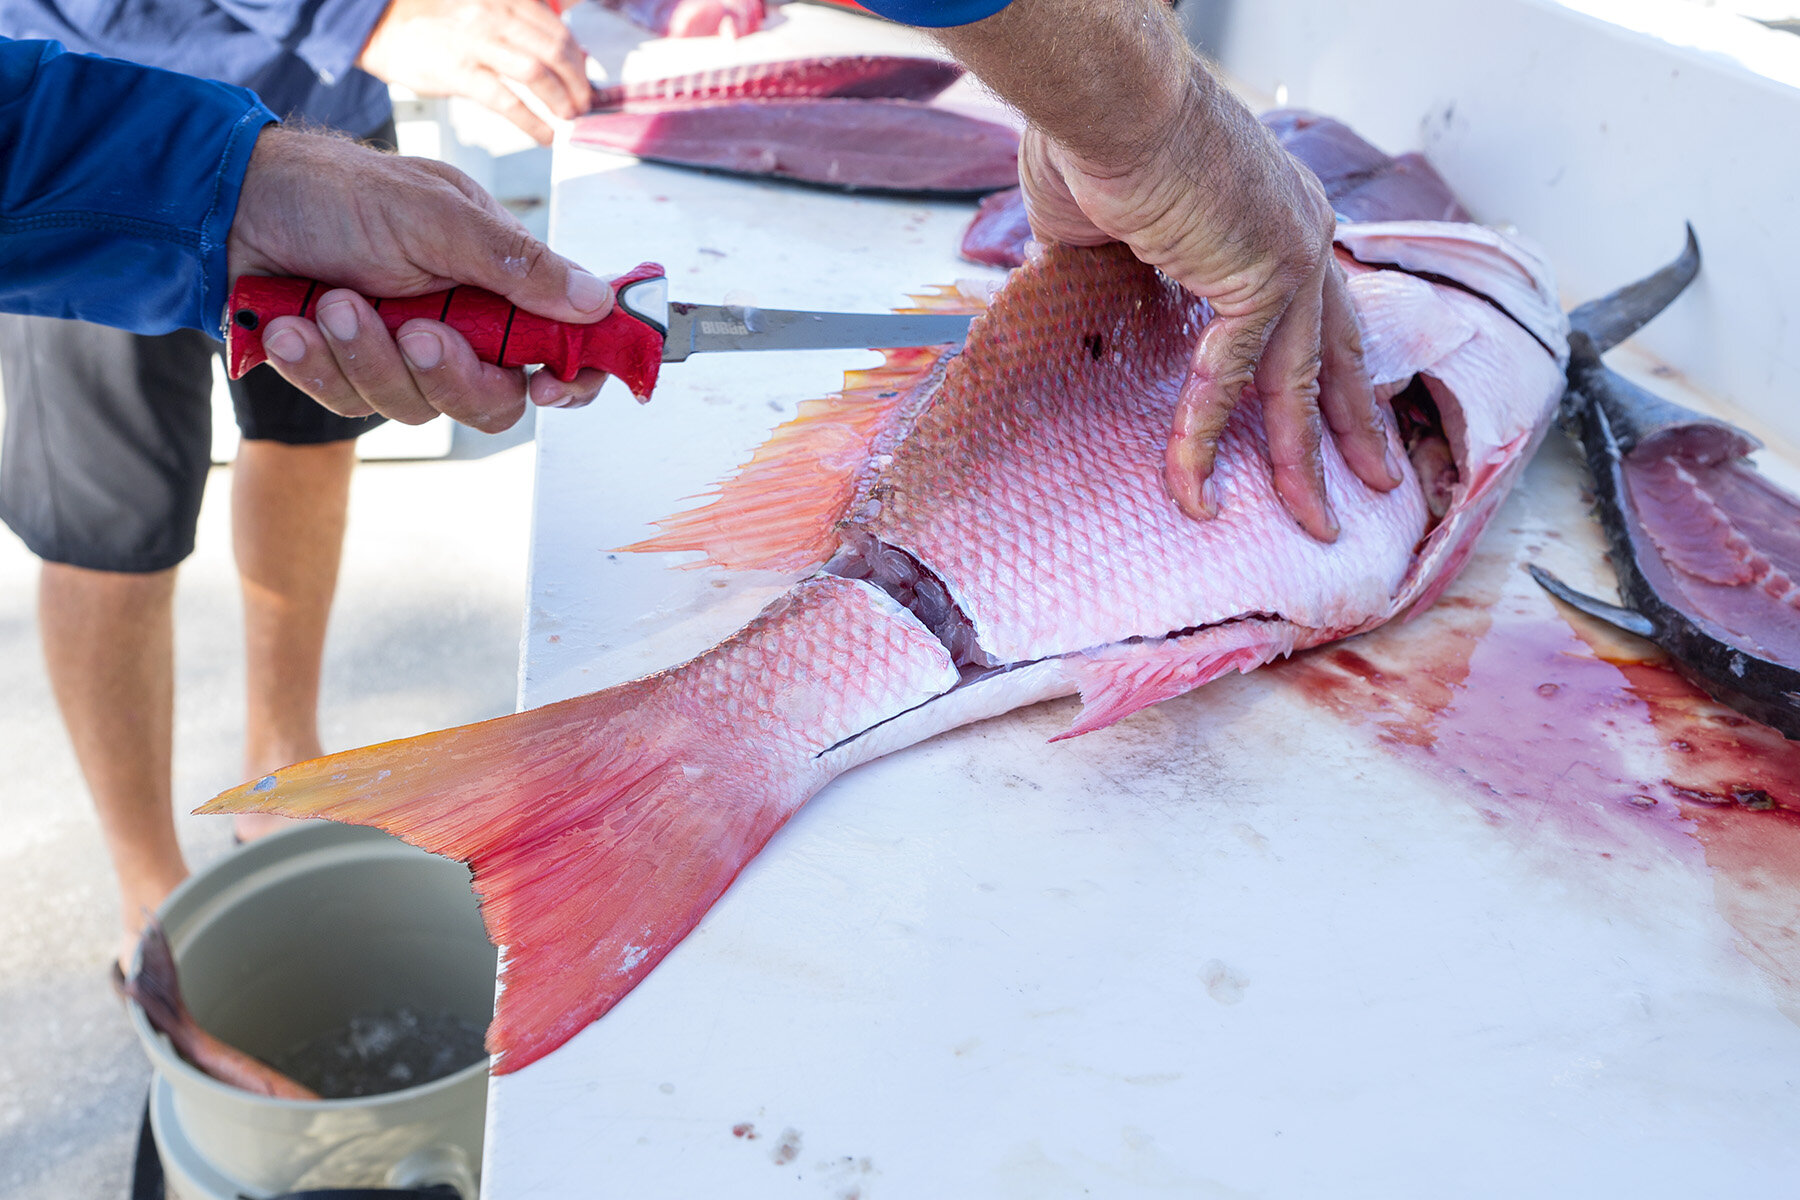 Mangrove Snapper - The Fish Everyone Loves to Catch